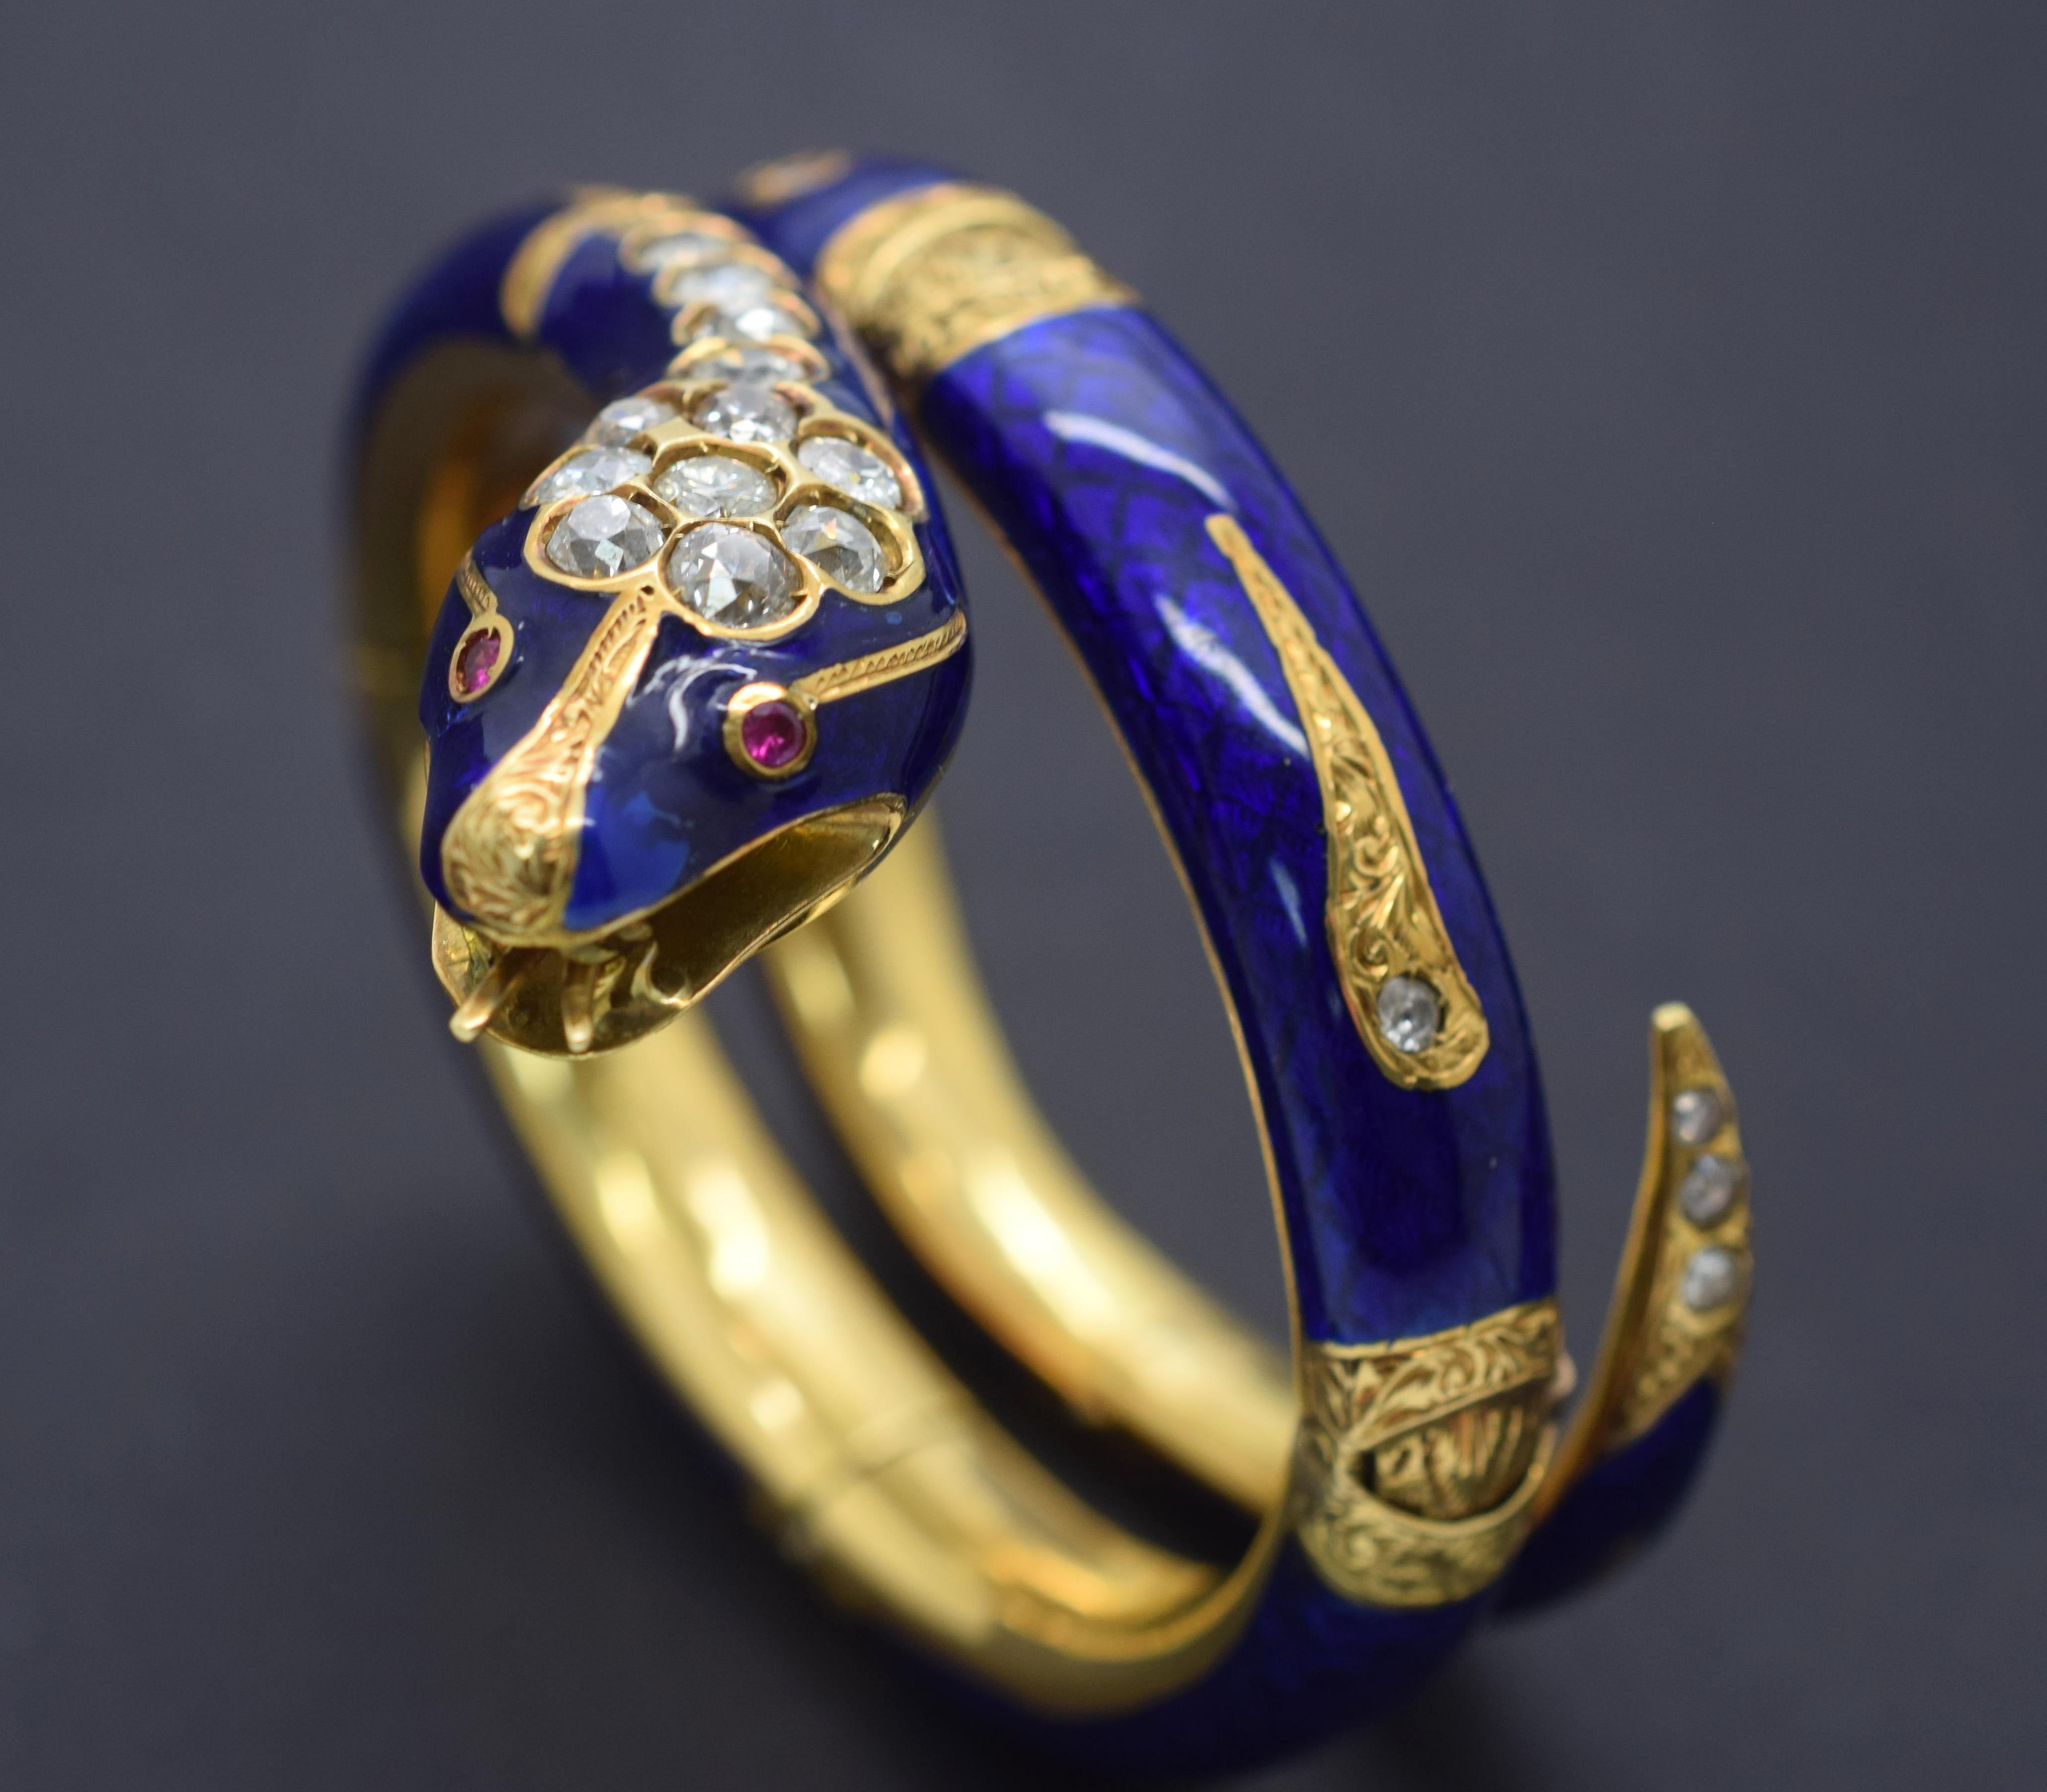 Gorgeous snake bracelet crafted in 18k yellow gold with vivid blue hot enamel on the surface. This Art Nouveau bracelet was hand crafted by master's of their time. Details are shown through out, engraving and filigree are shown on every piece of